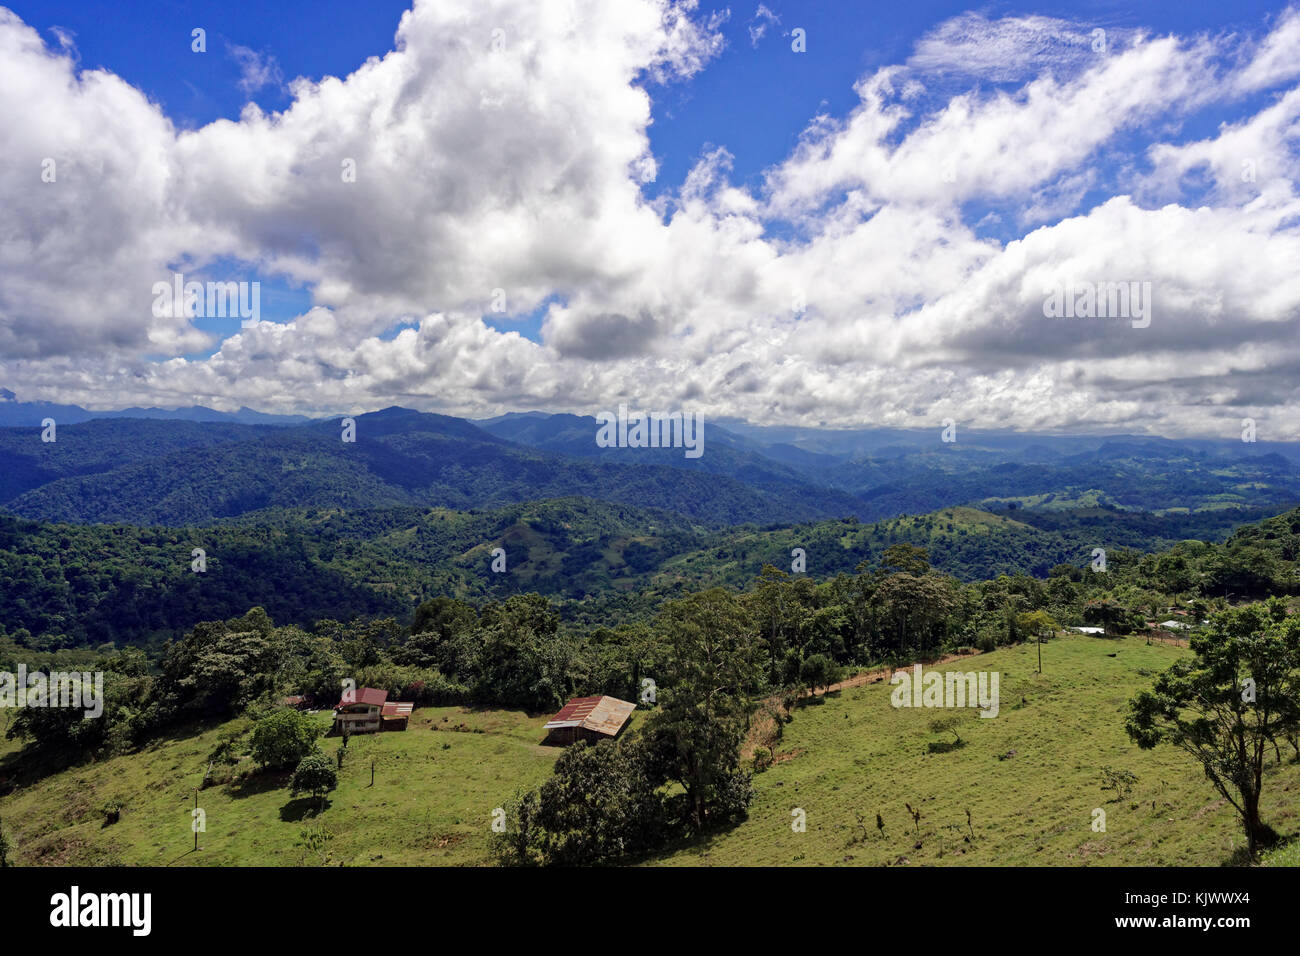 On the road 10 from Siquirres to Turrialba, Costa Rica. The road is very steep and winding through the mountain range Cordillera de Talamanca. Scenic views into the valleys are breathtaking. Stock Photo